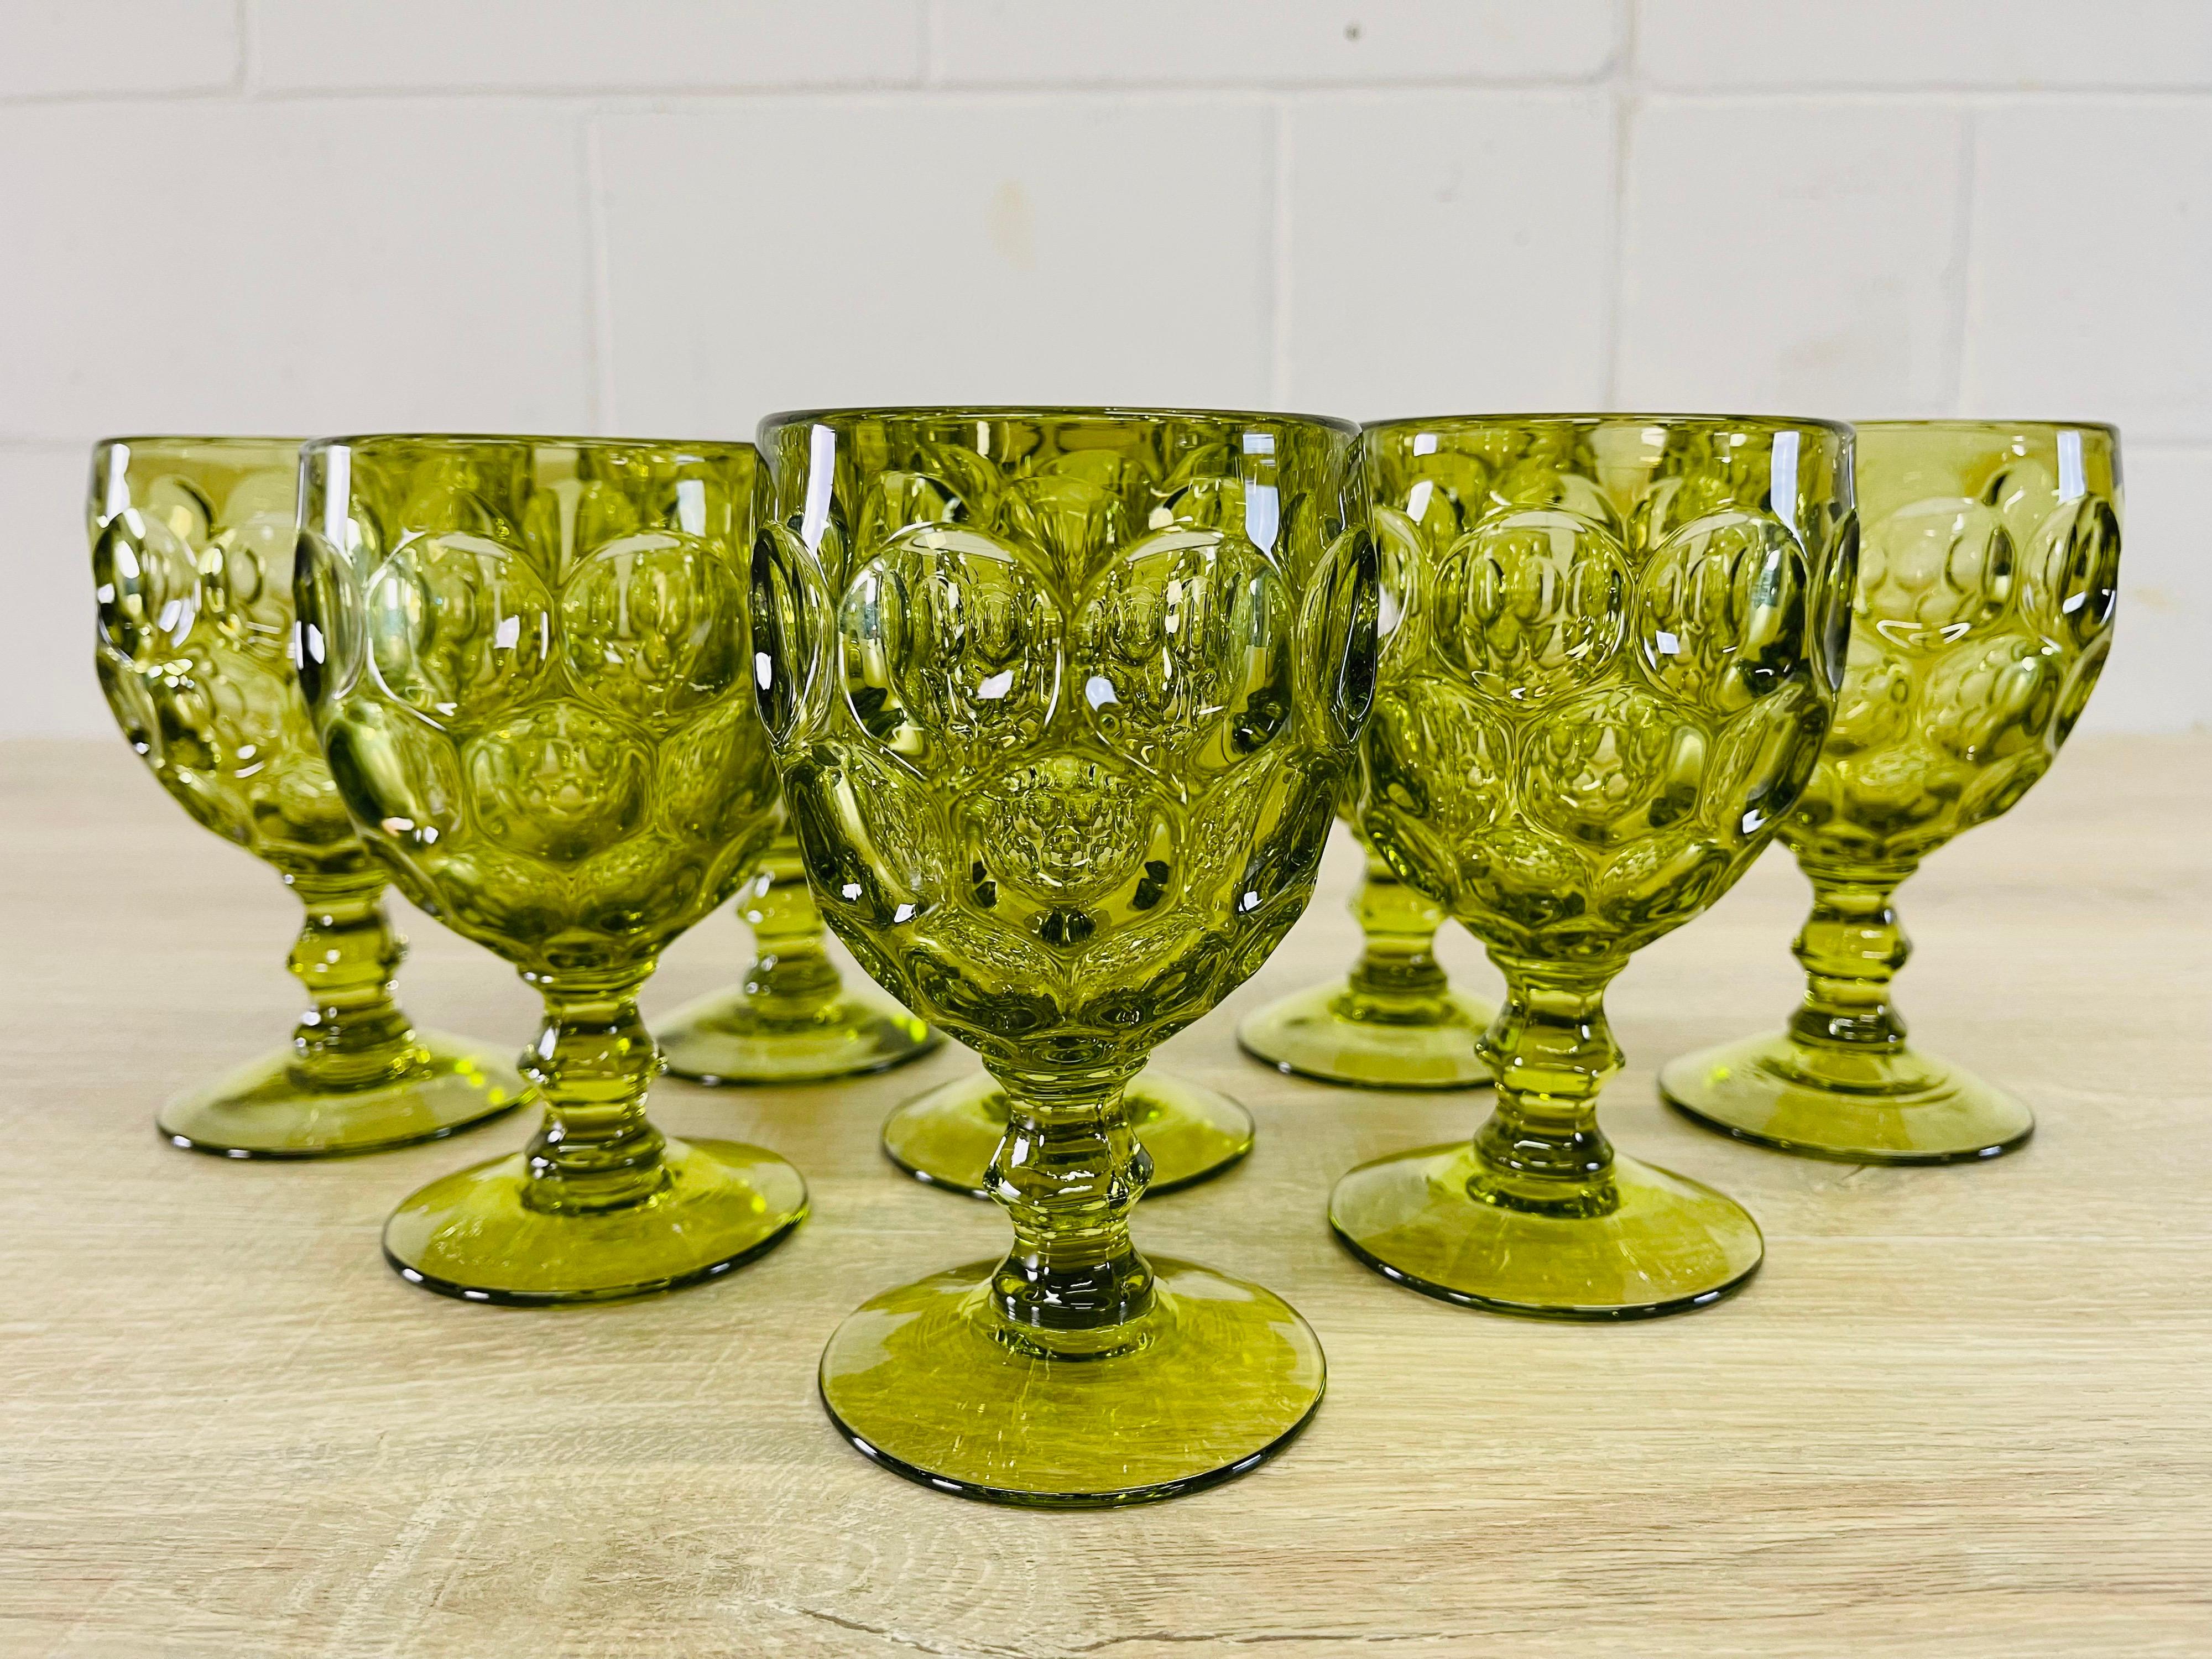 Vintage 1960s set of 8 green glass thumbprint water or wine stems. No marks.